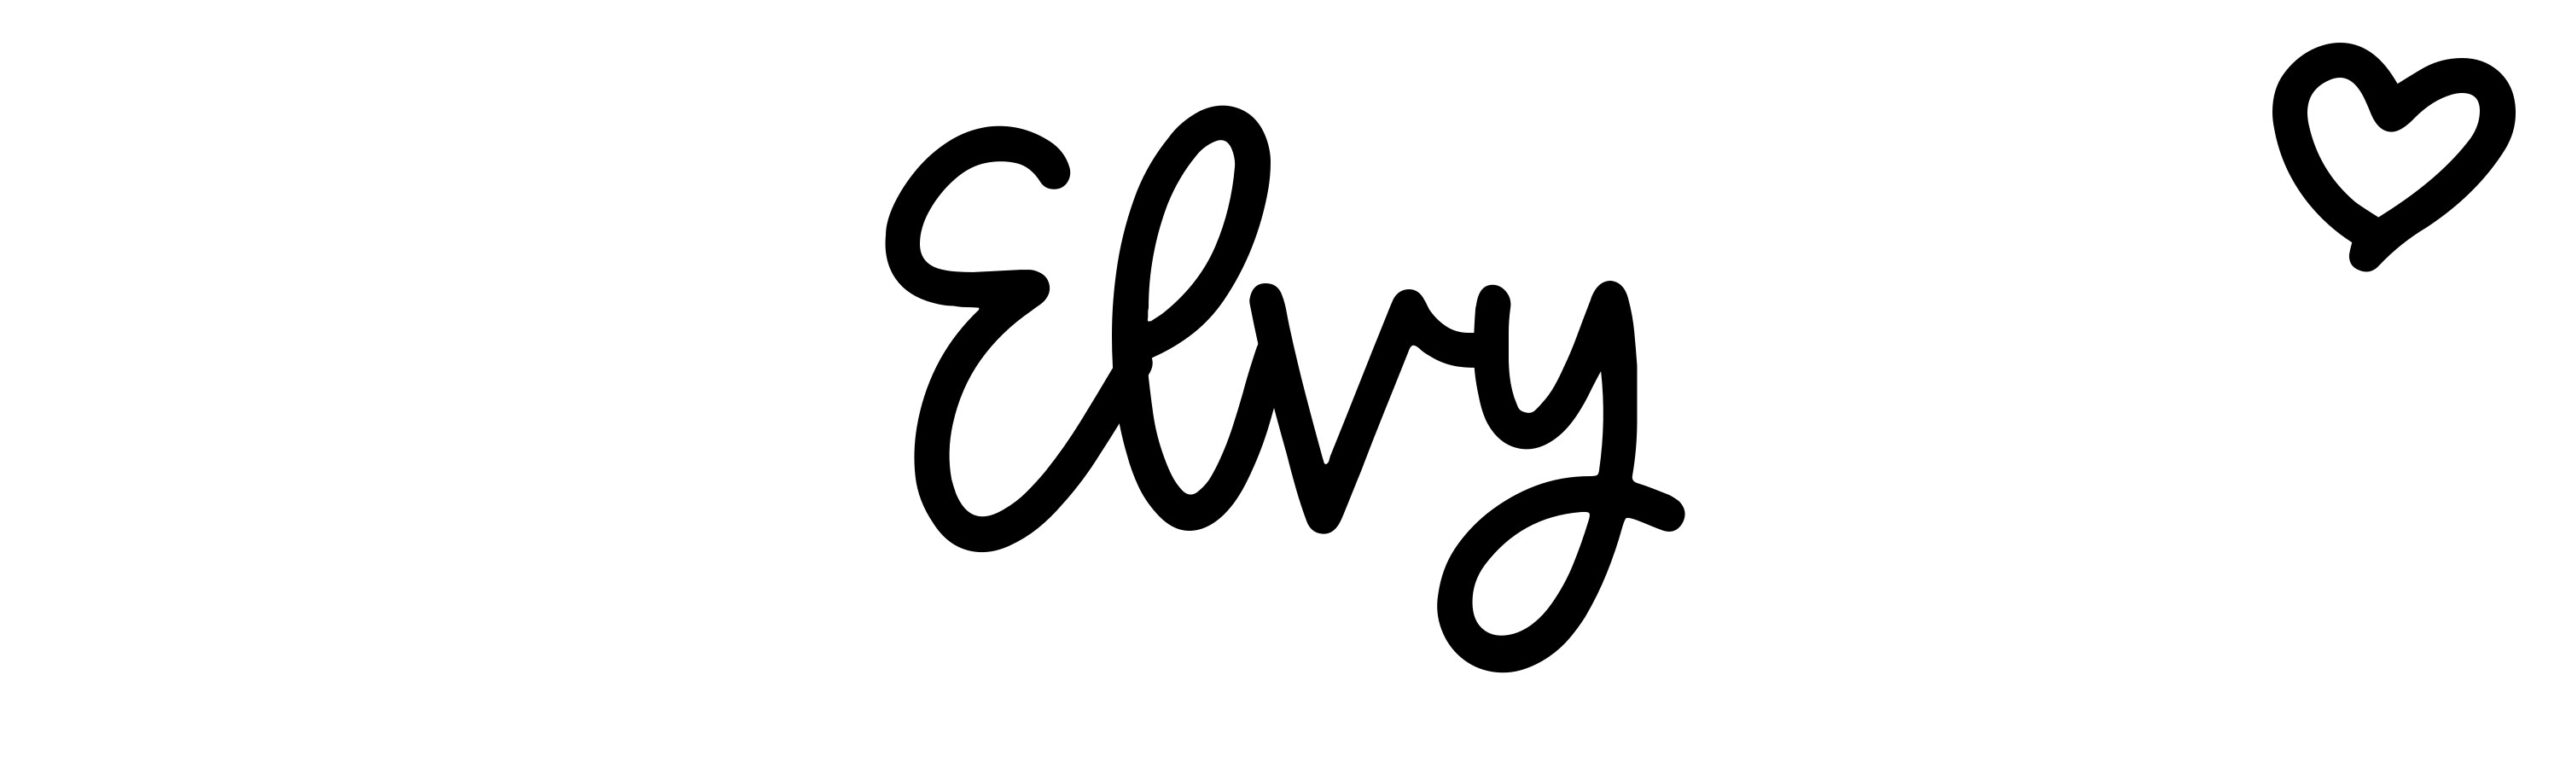 Elvy - Name meaning, origin, variations and more